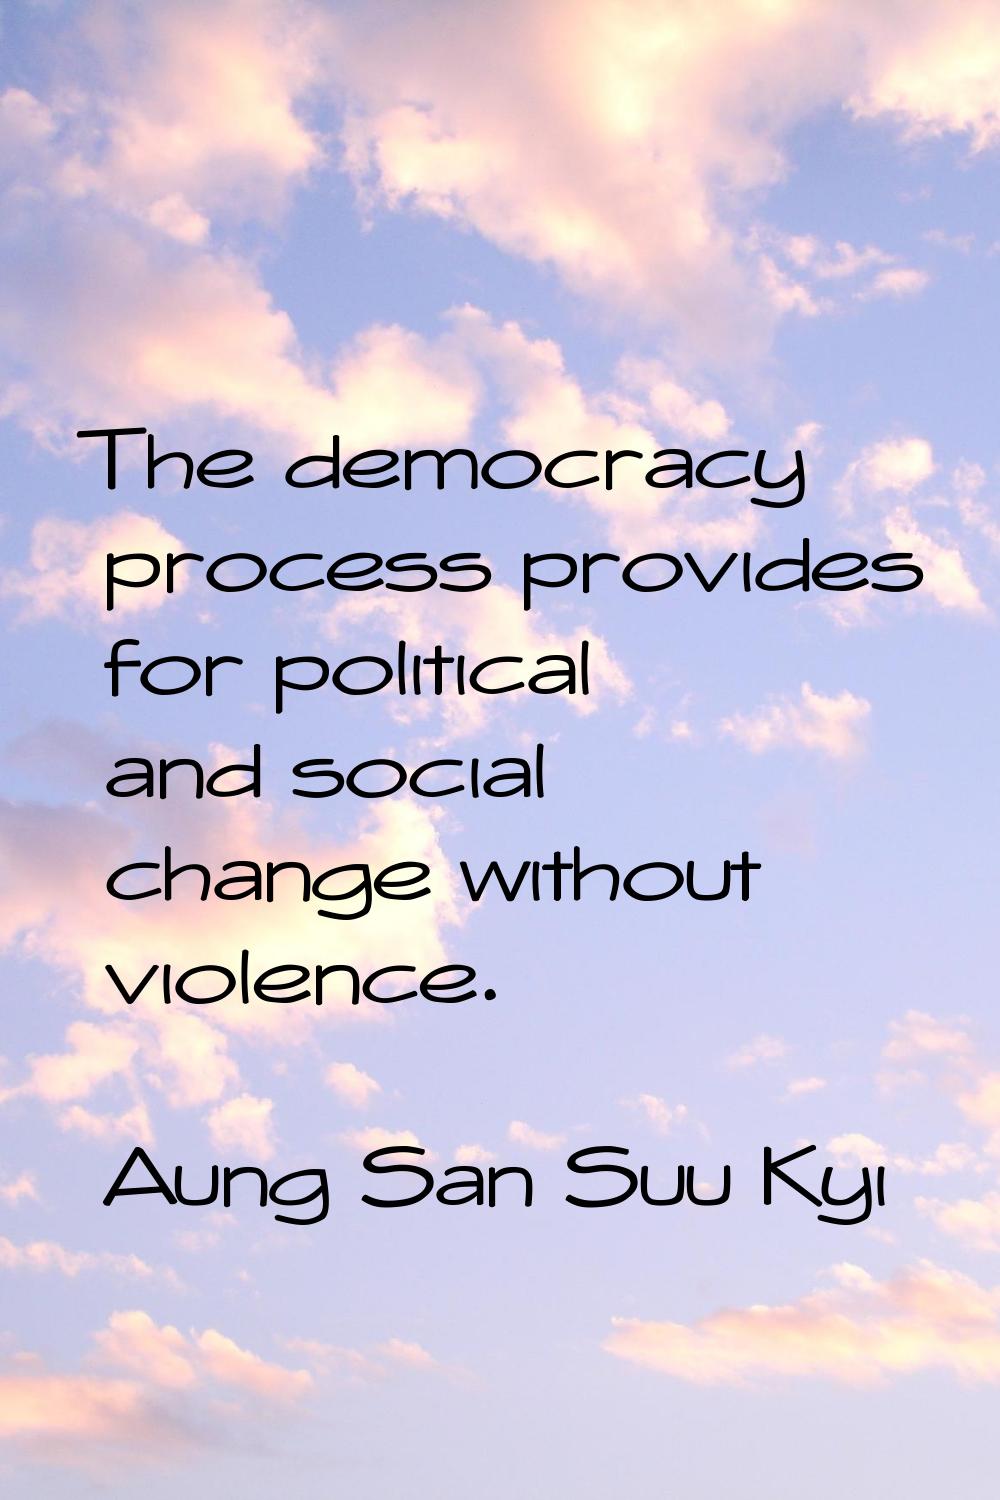 The democracy process provides for political and social change without violence.